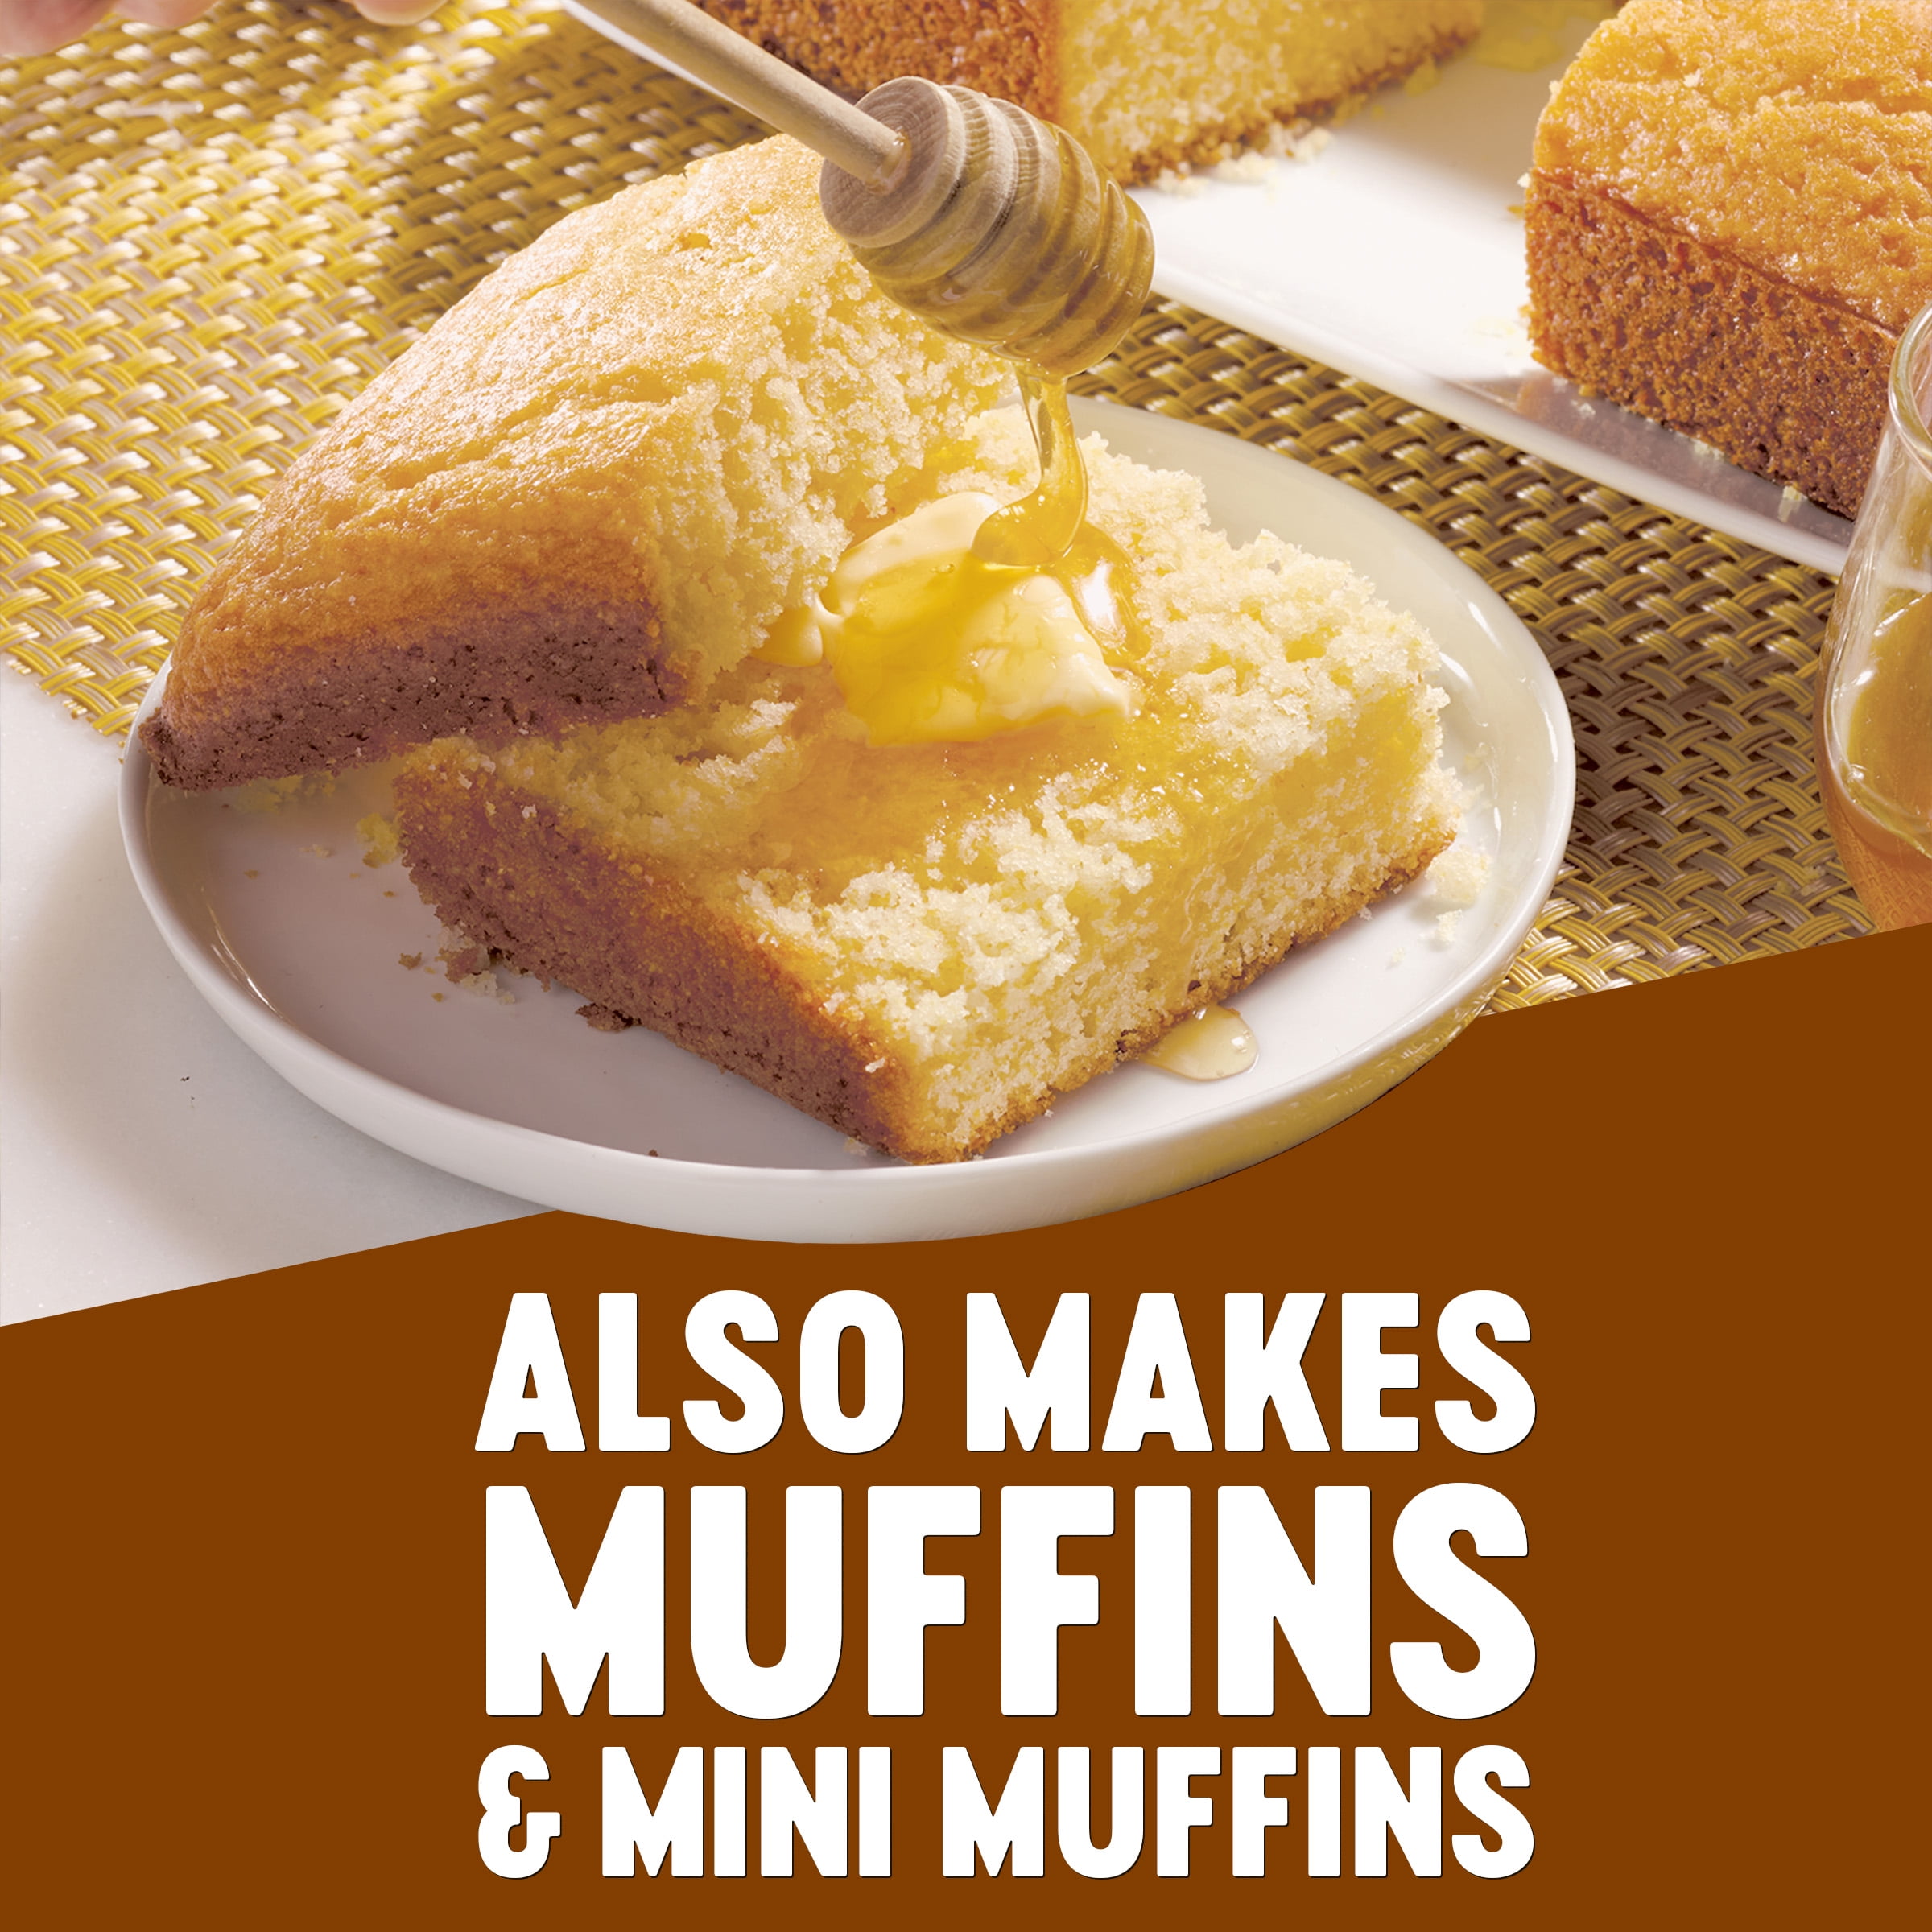 Krusteaz Honey Cornbread and Muffin Mix, Made with Real Honey, 15 oz Box 